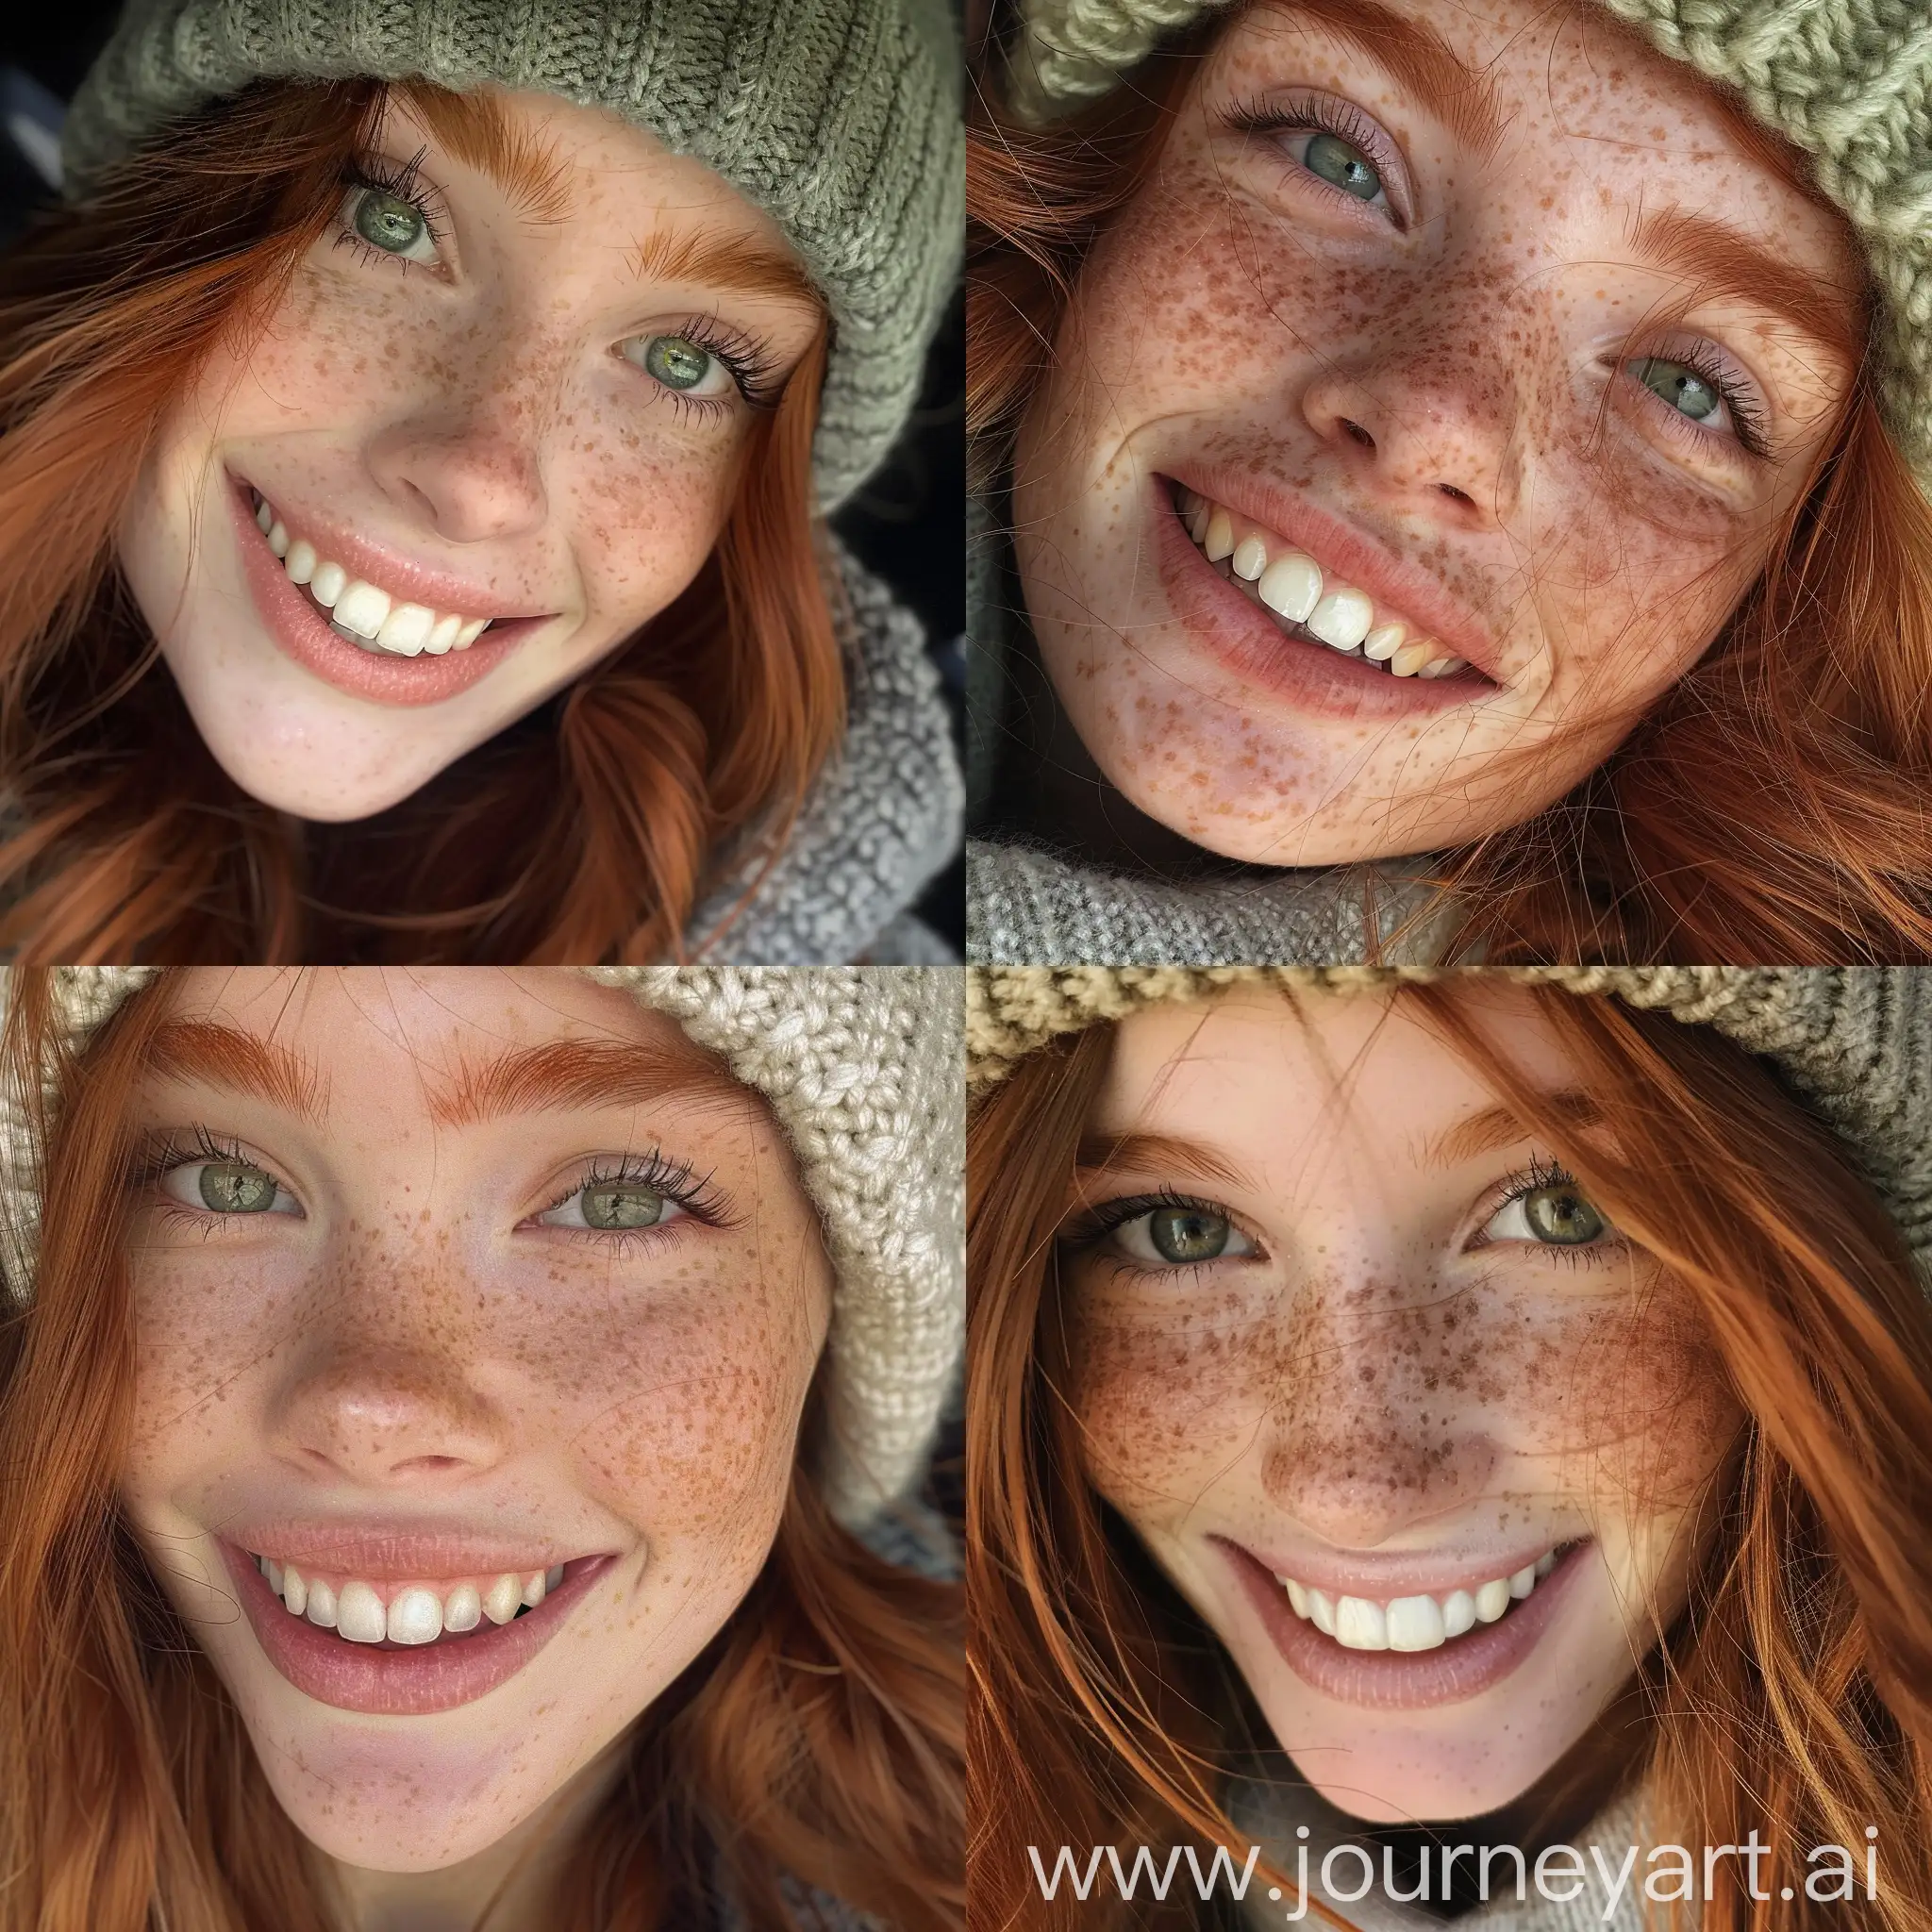 Redhead-Teenage-Girl-with-Freckles-Smiling-Brightly-in-Green-Beanie